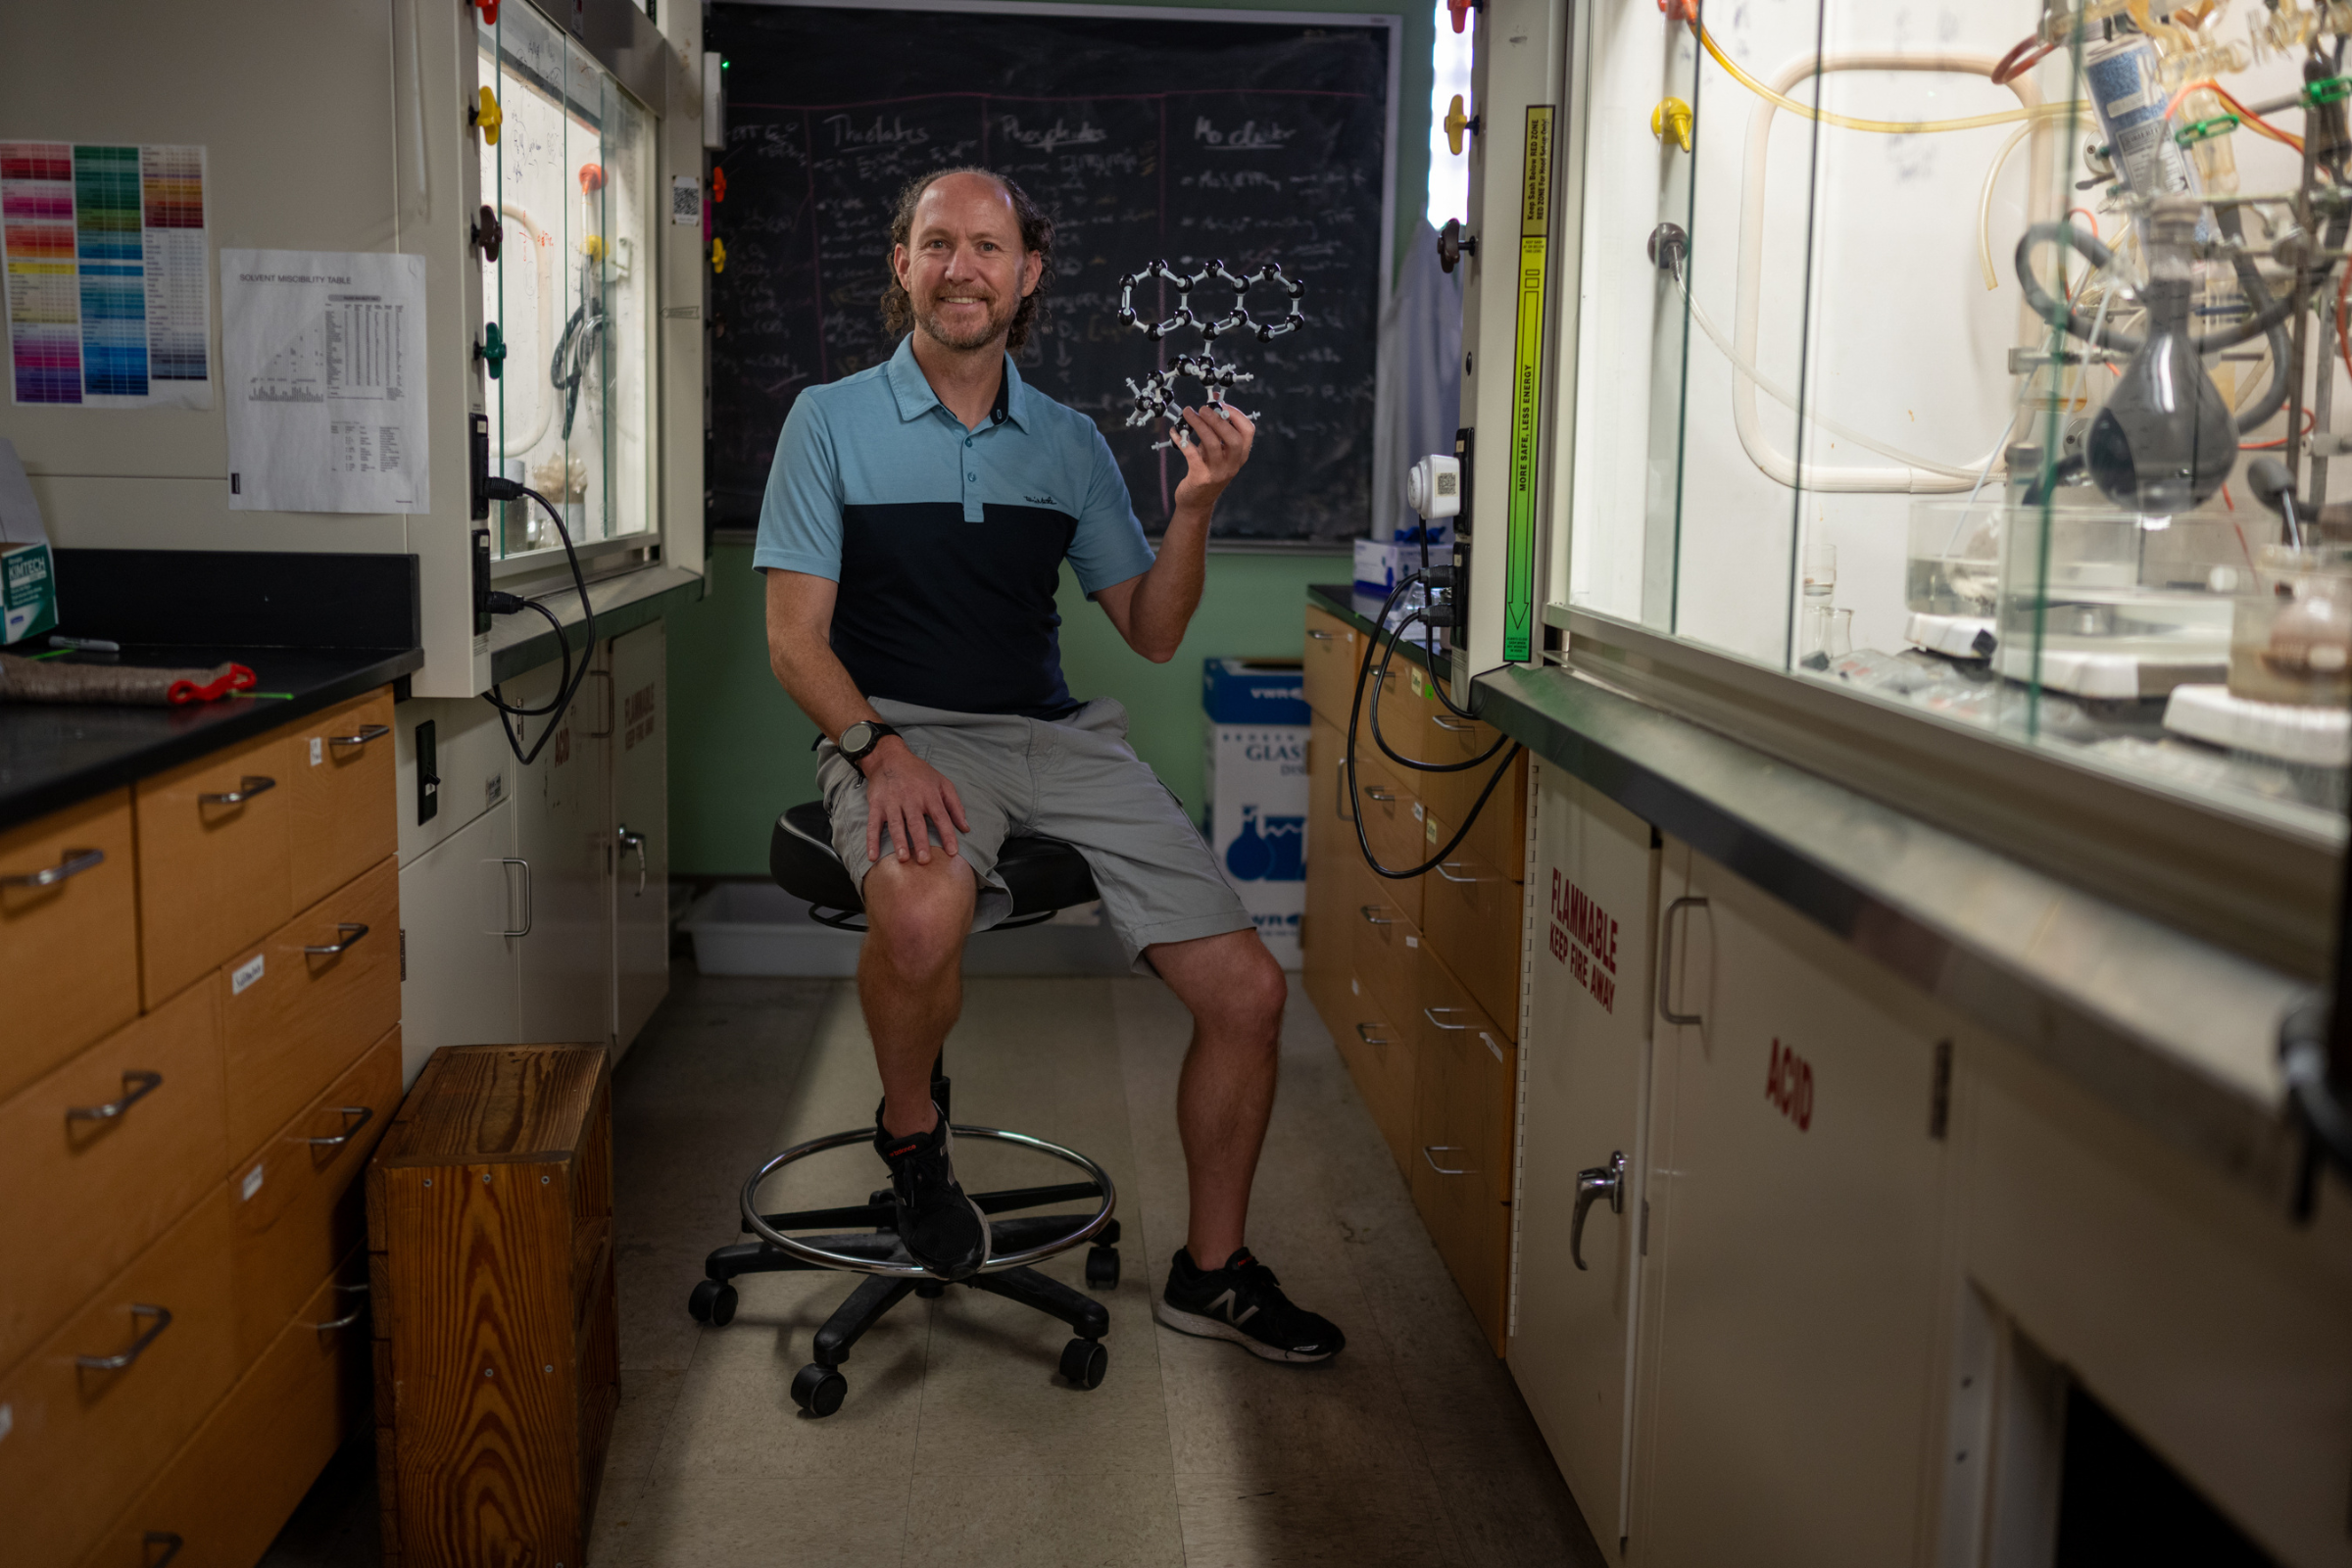 Michael Rose sits between two lab benches on a rolling stool holding a model of a molecule